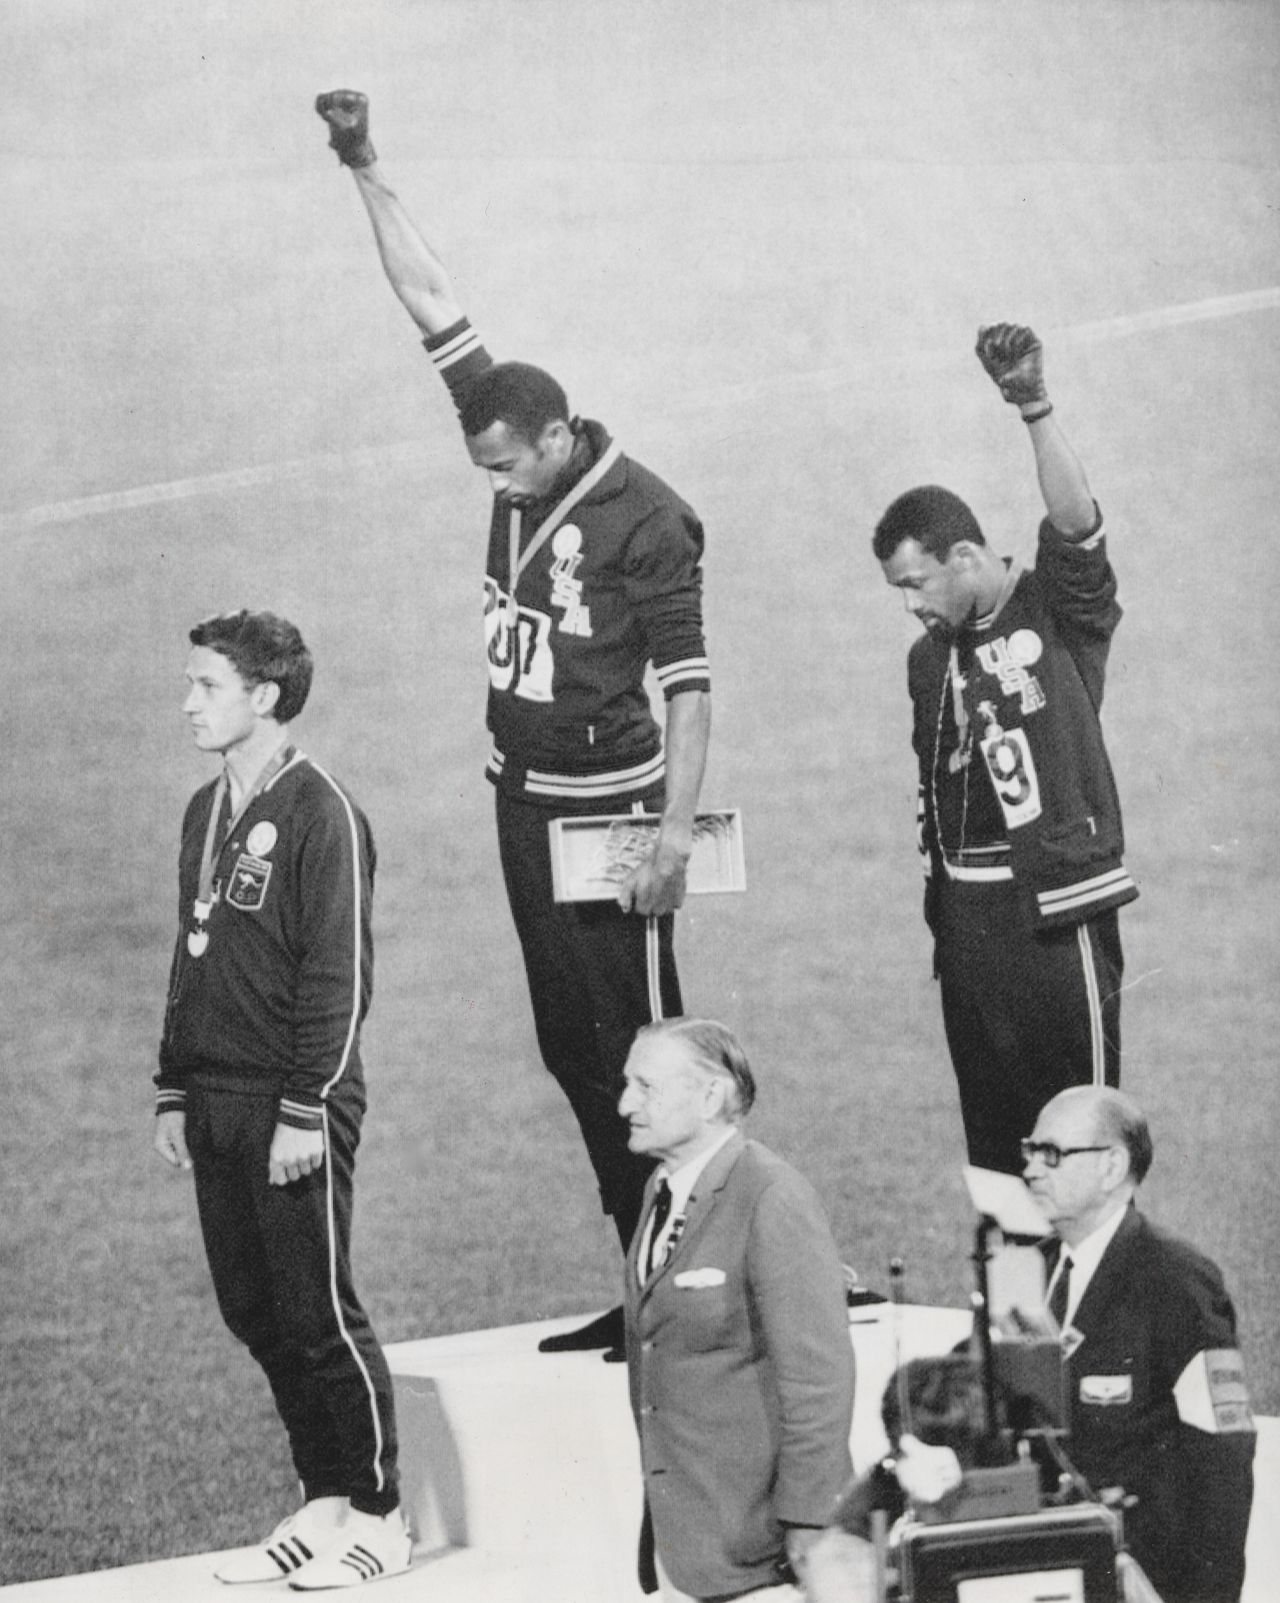 Two-hundred-meter gold medalist Tommie Smith and bronze medalist John Carlos raise their fists in protest at the 1968 Olympics in Mexico City.